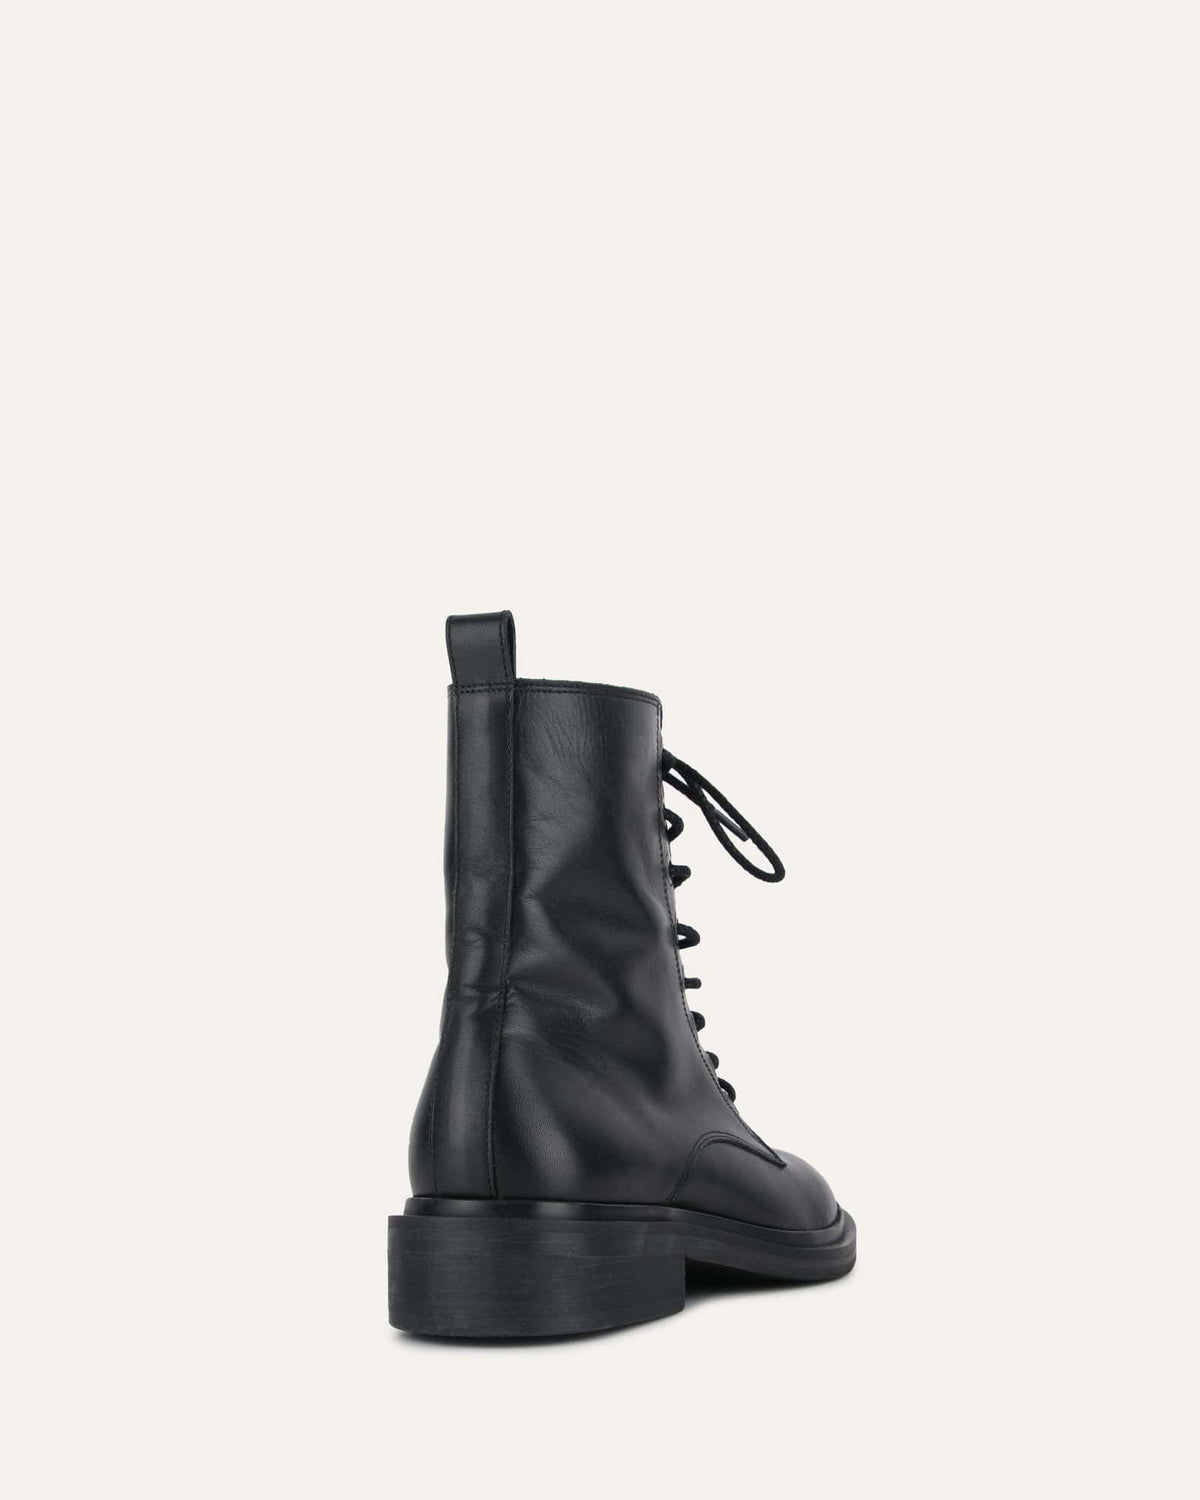 DARWIN FLAT ANKLE BOOTS BLACK LEATHER